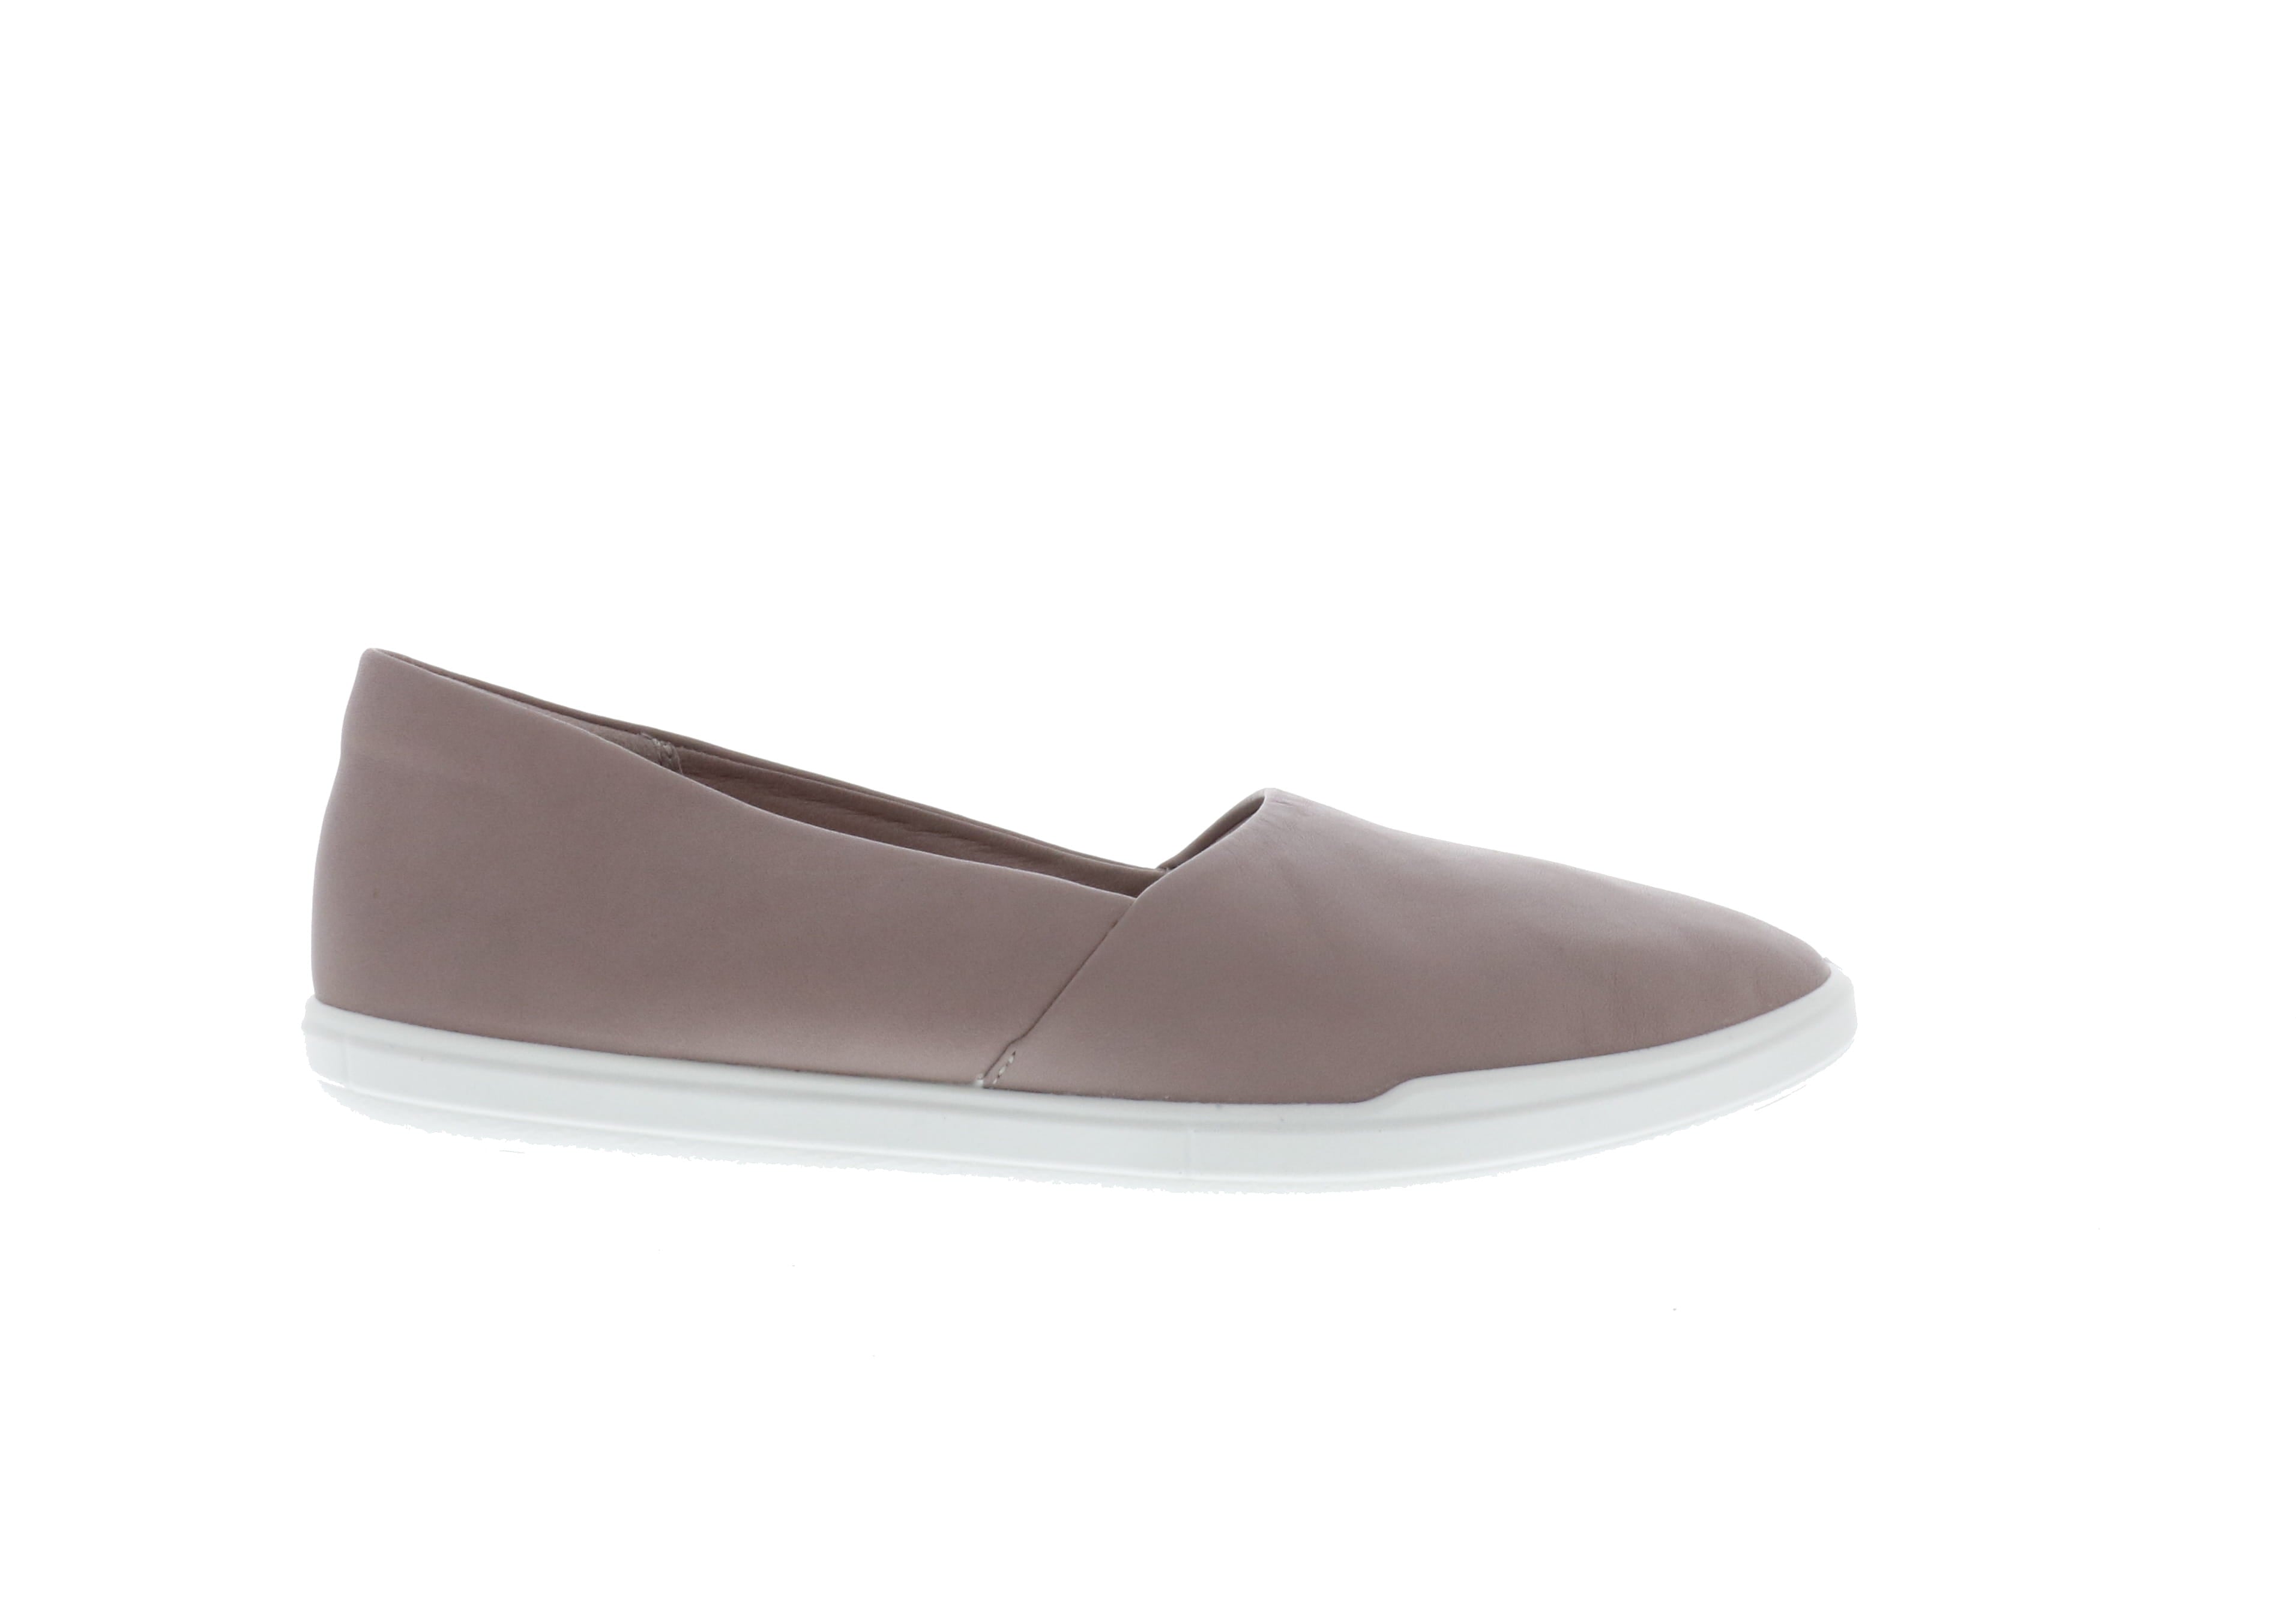 208603-01702 – Chiappetta Shoes